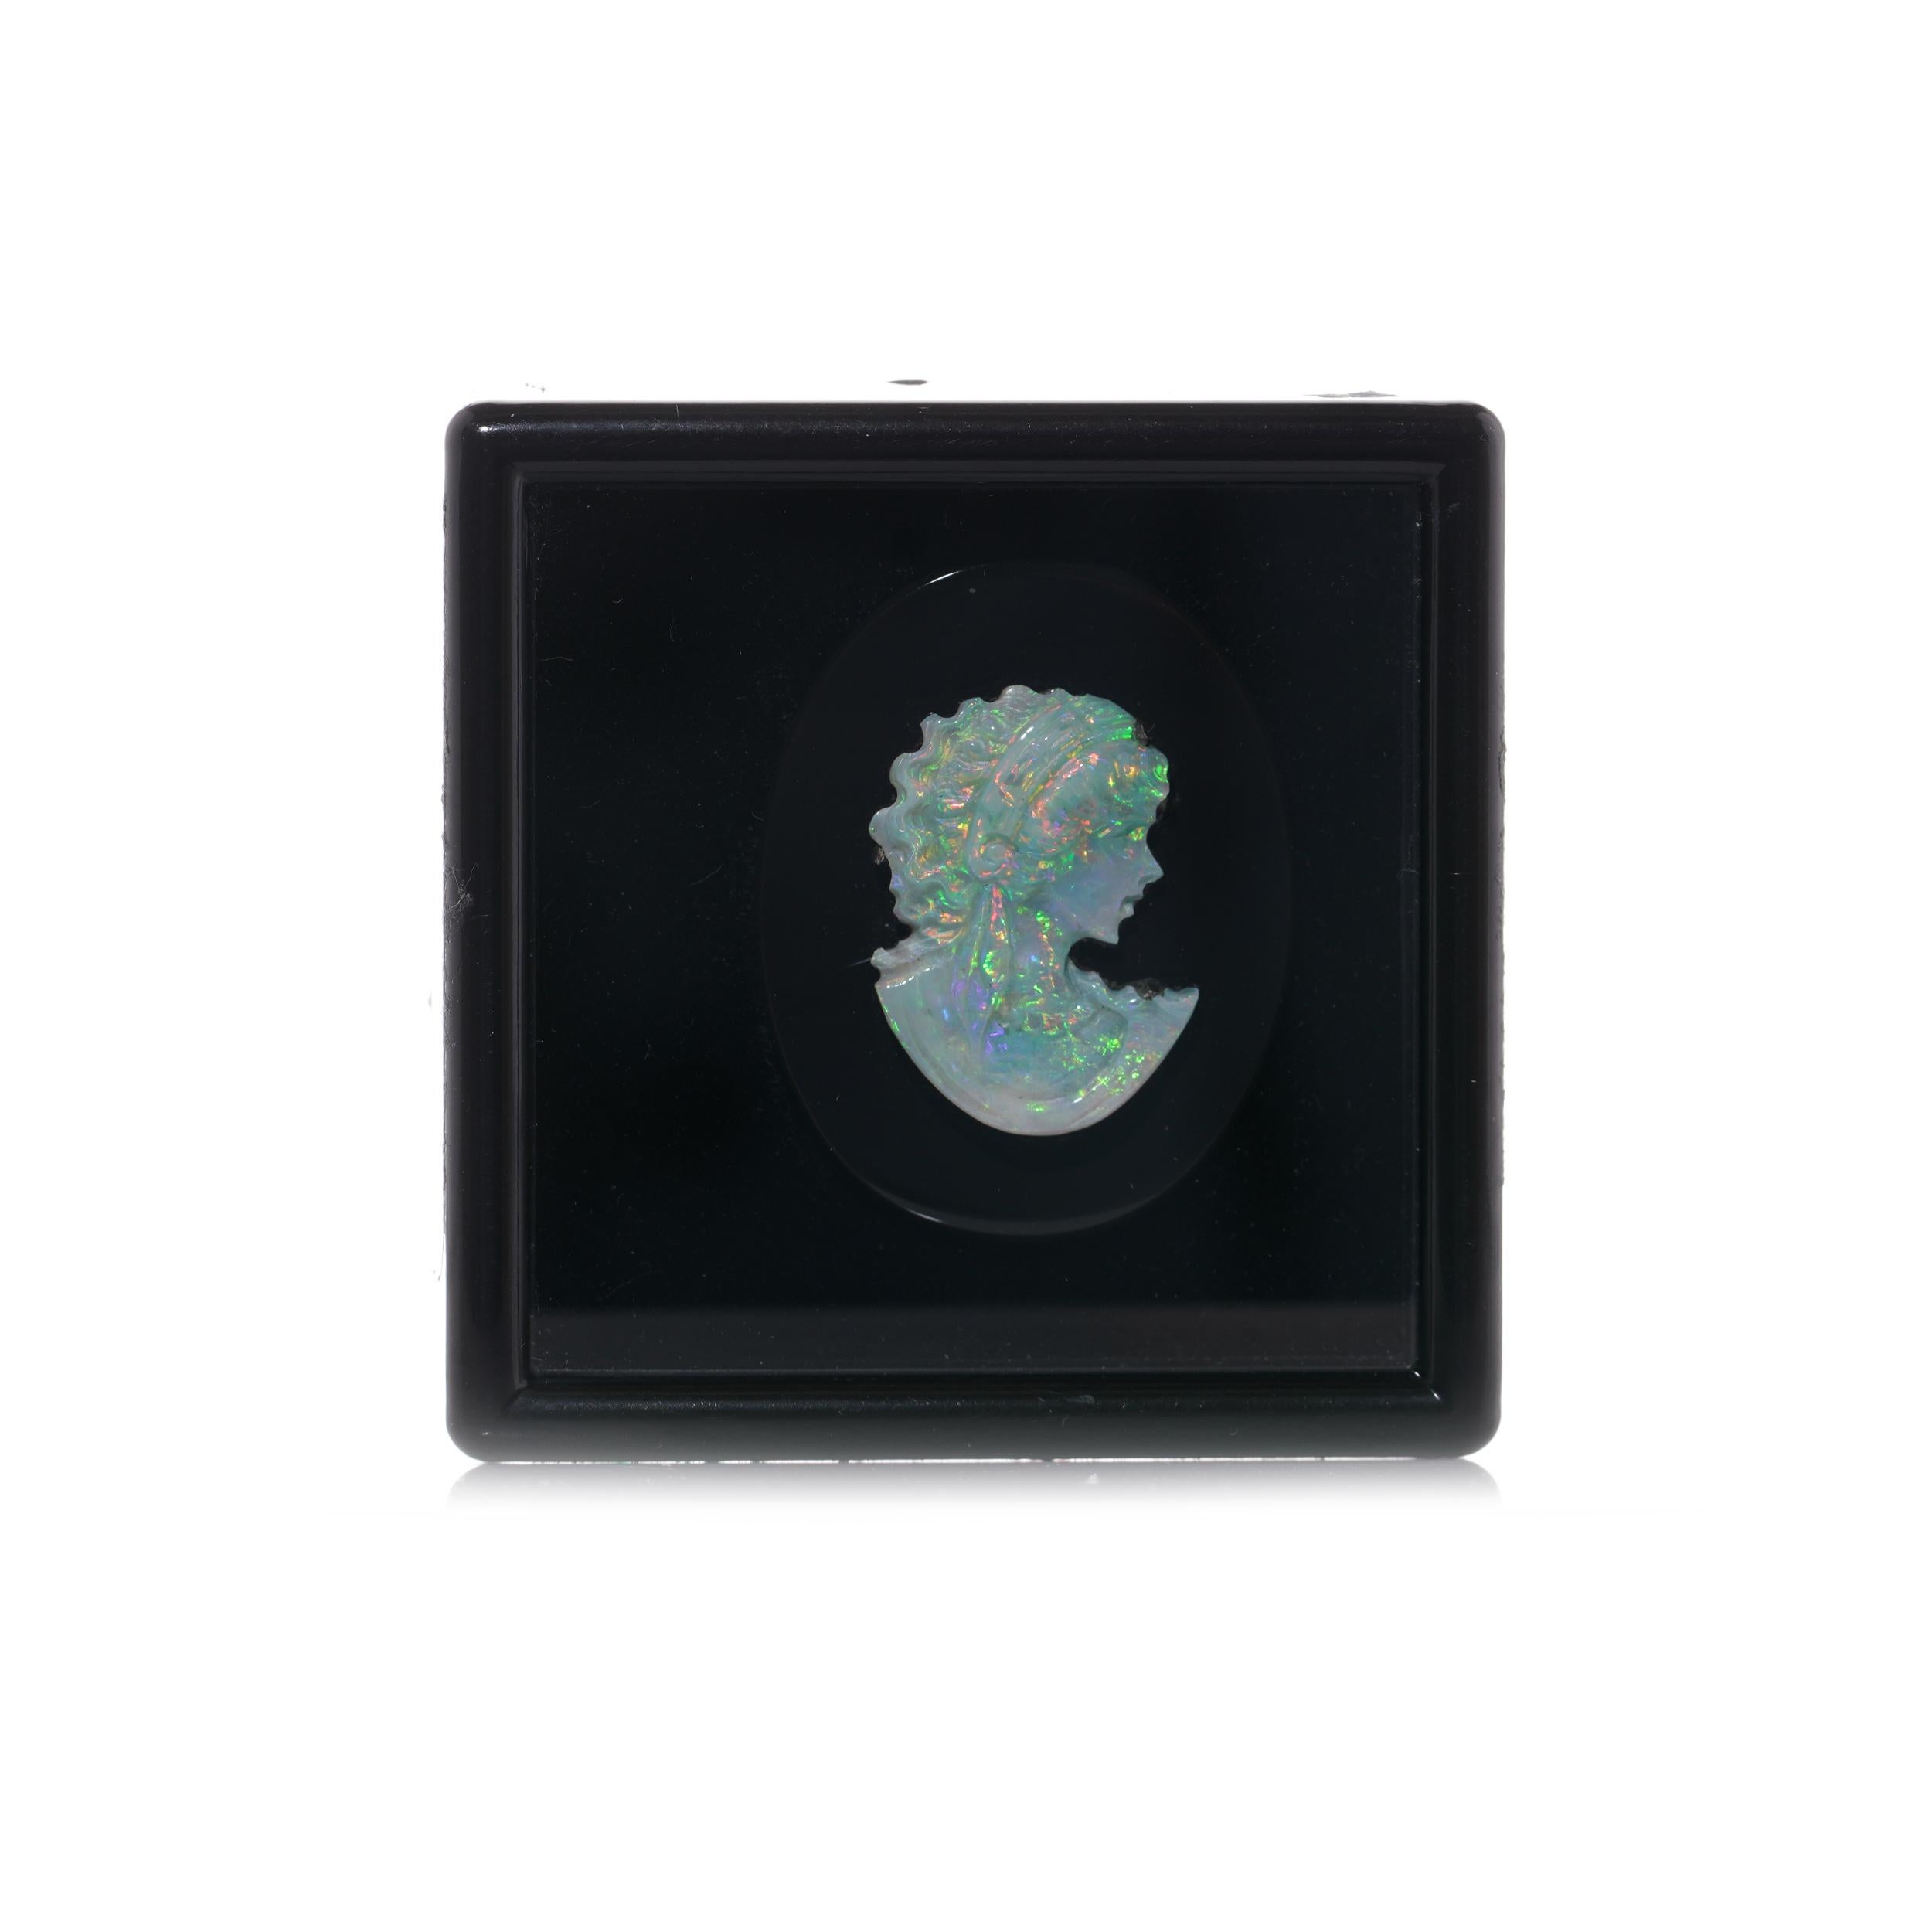 Antique opal carving cameo mounted on the onyx plaque. 
The plaque features an intricately carved opal cameo portraying the head and shoulders of a young lady. 

The dimensions:
Opal cameo size: 21 mm x 16mm
Onyx plaque size: 31 mm x 25 mm
 Weight: